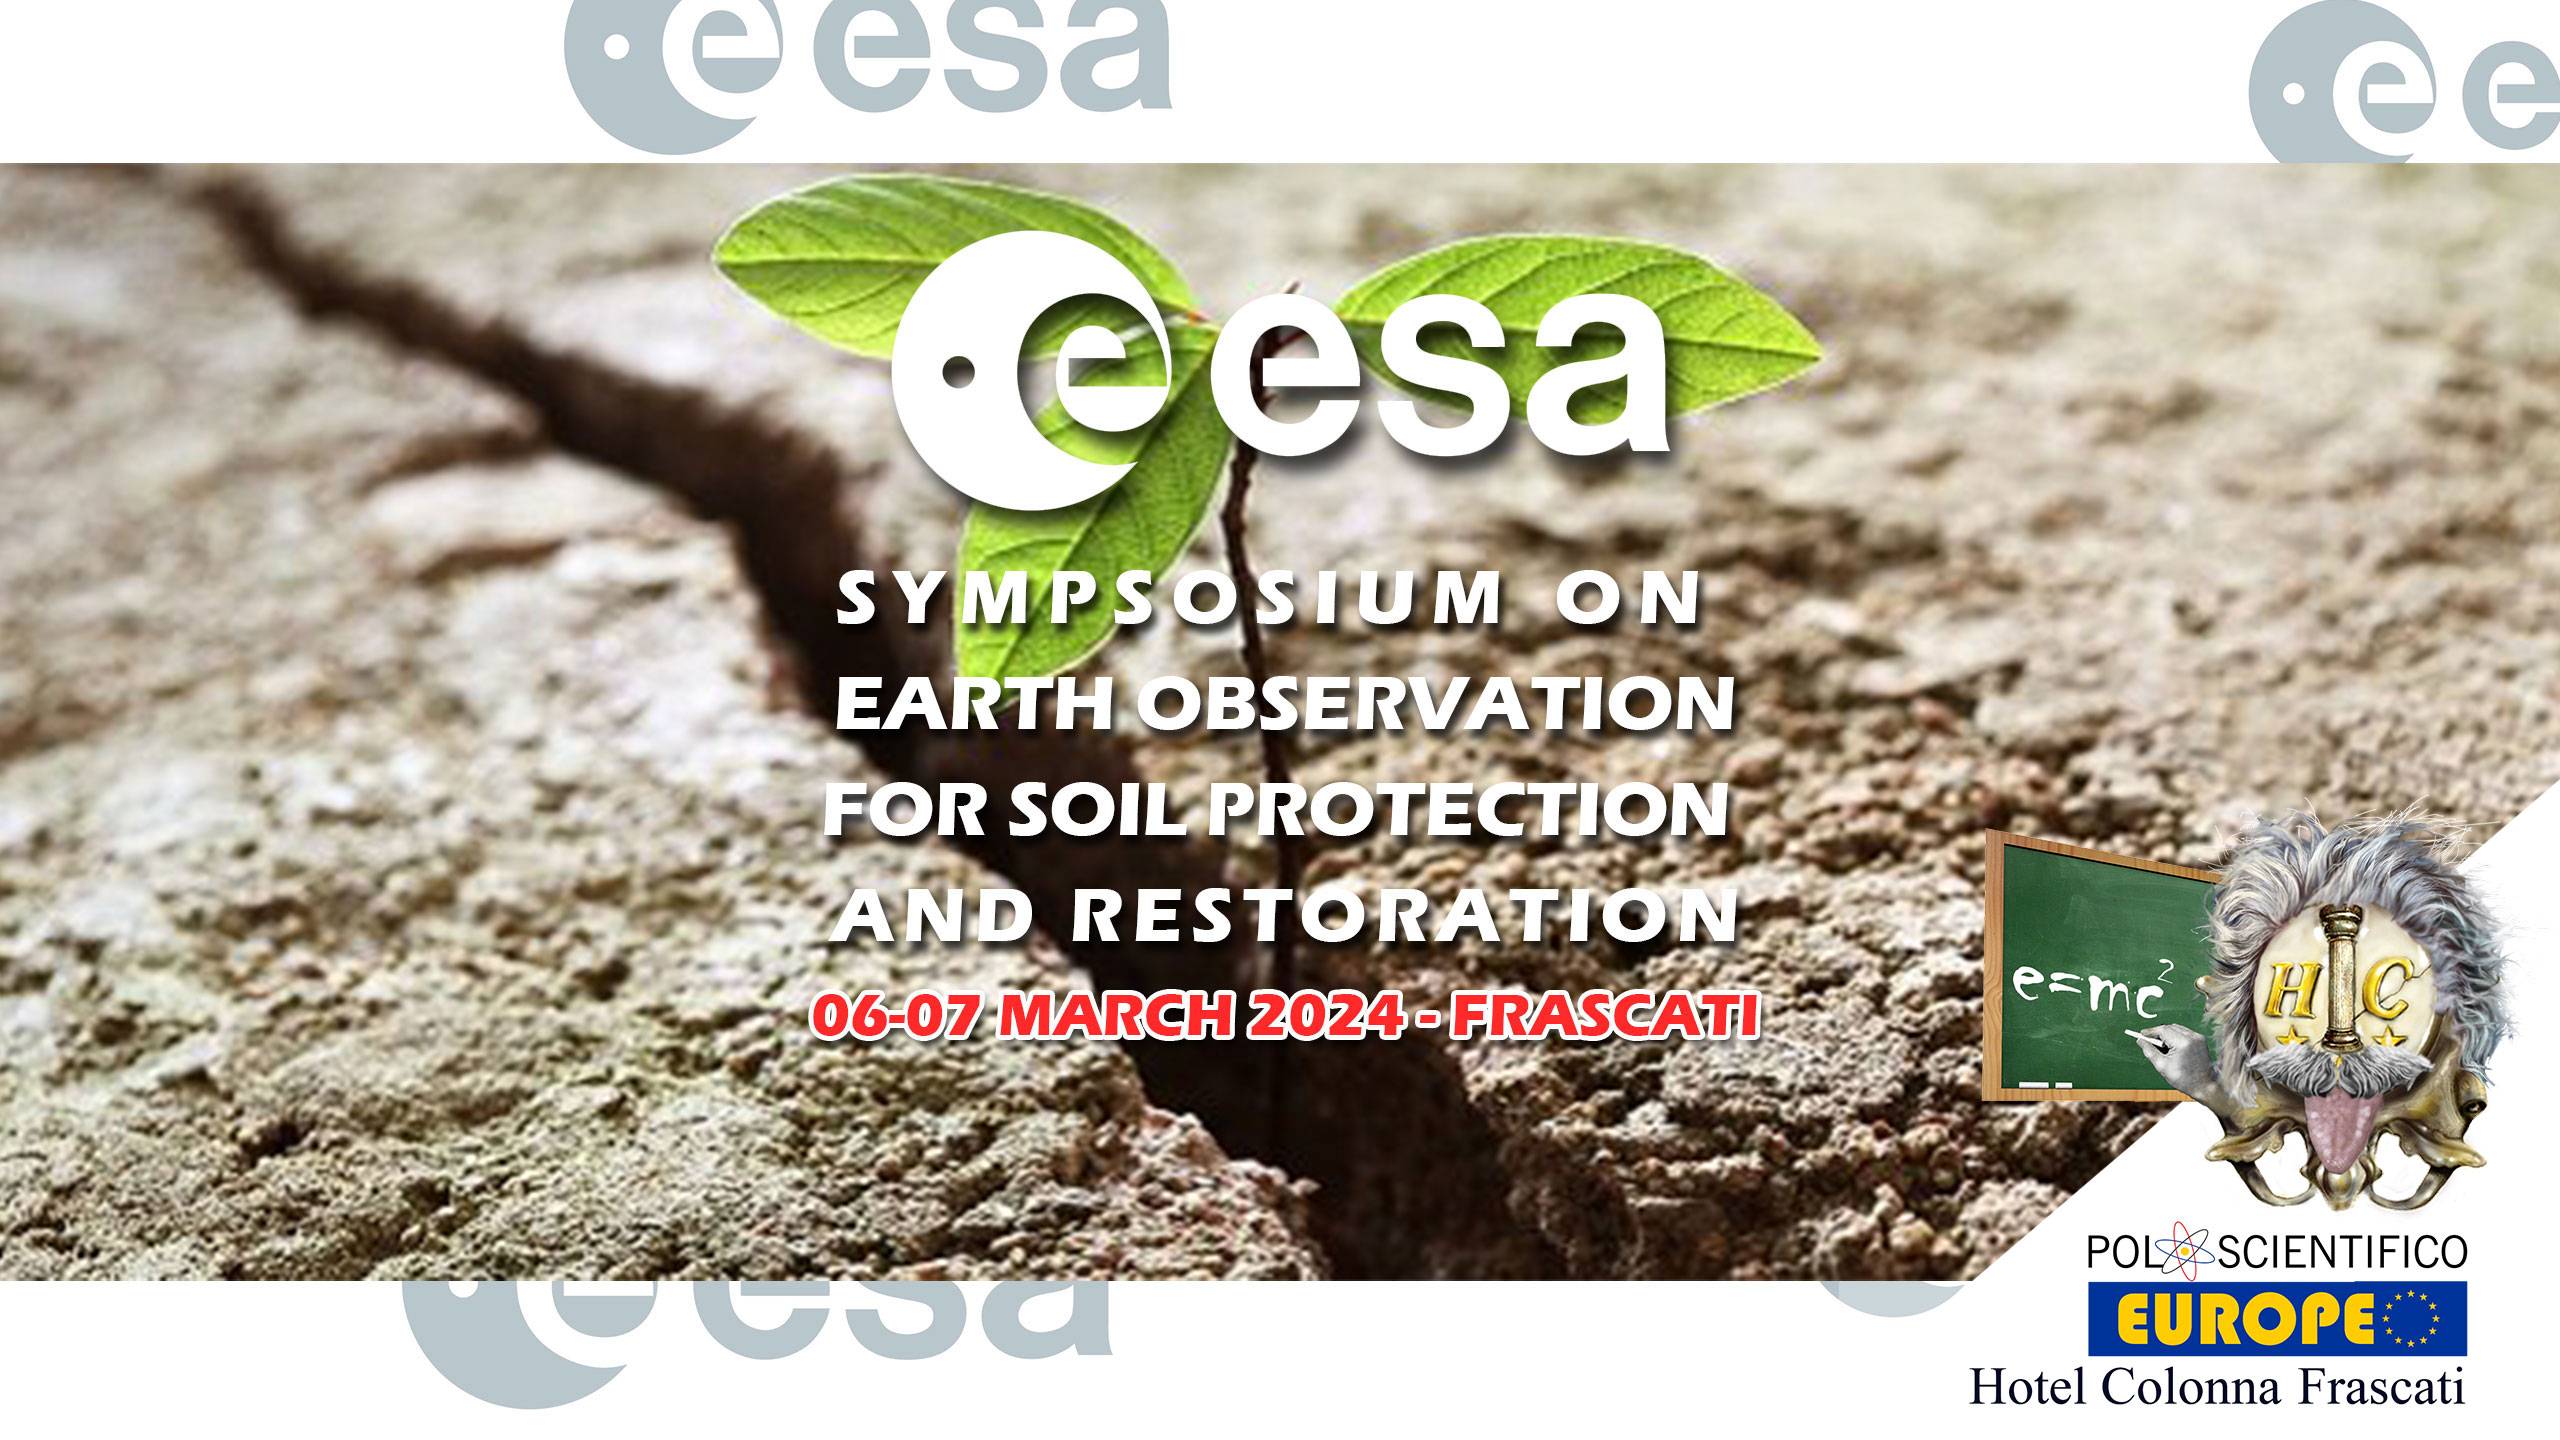 2560/1-symposium-on-earth-observation-for-soil-protection-and-restoration.jpg